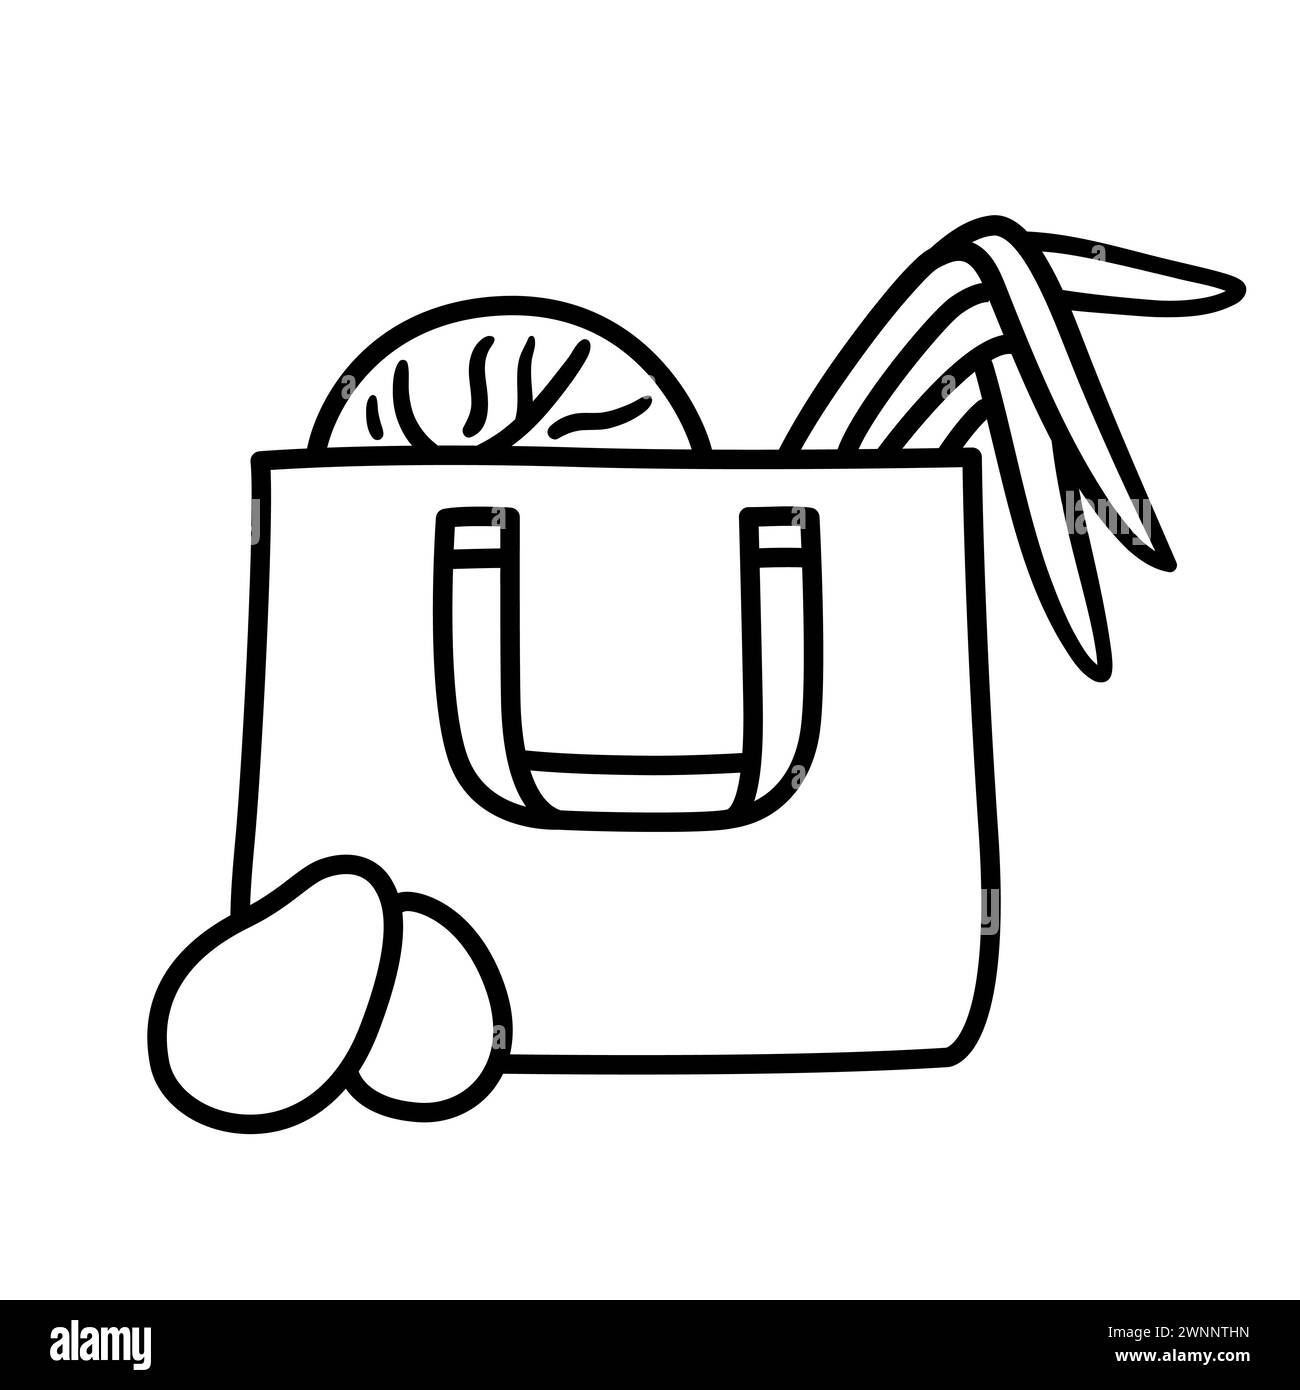 Shopping bag with fresh produce, organic vegetables from farmers market. Simple black and white doodle line icon. Hand drawn vector illustration. Stock Vector